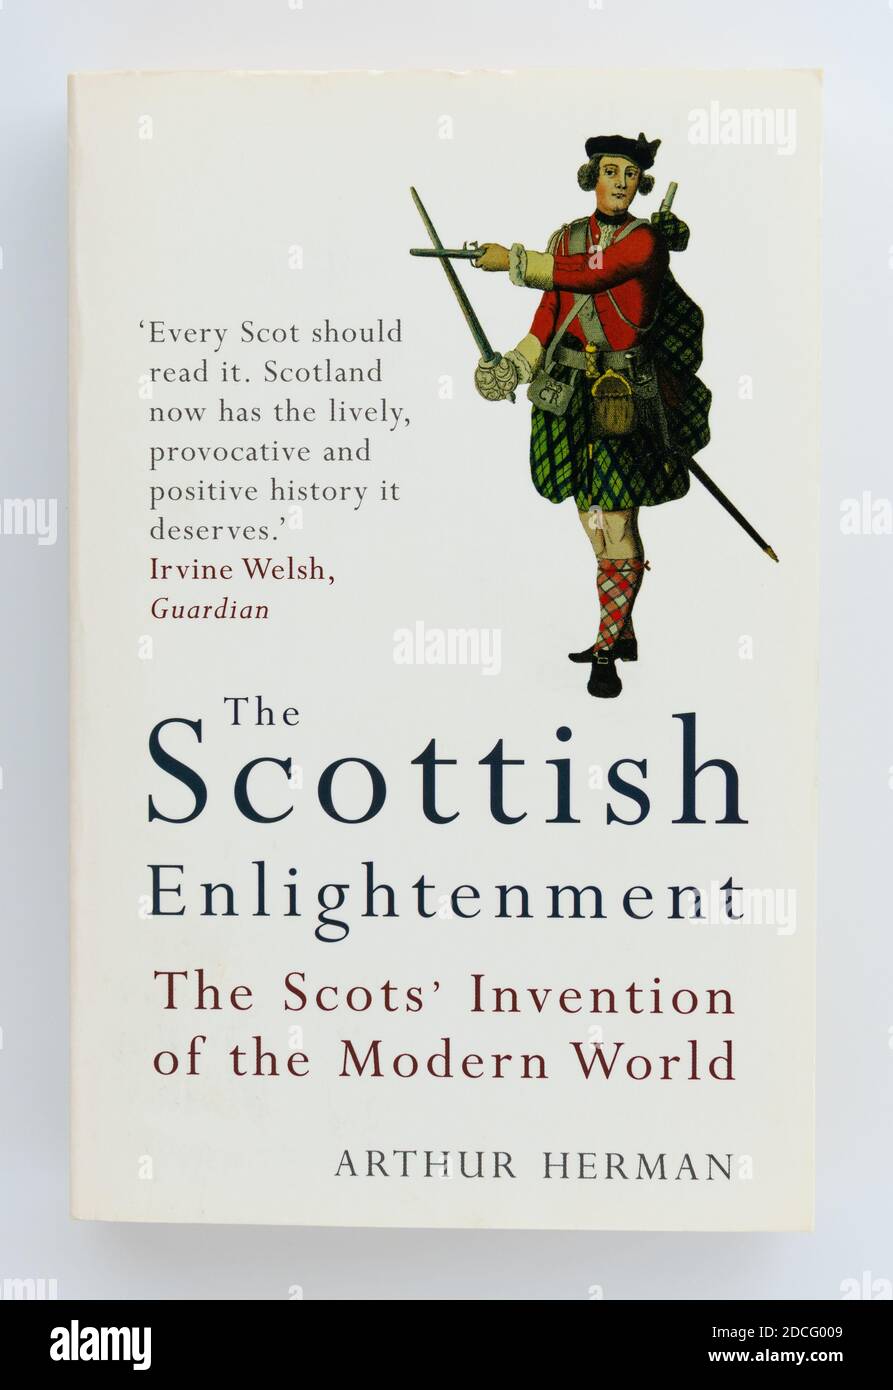 Scottish Enlightenment - The Scots' Invention of the Modern World - Arthur Herman Stock Photo